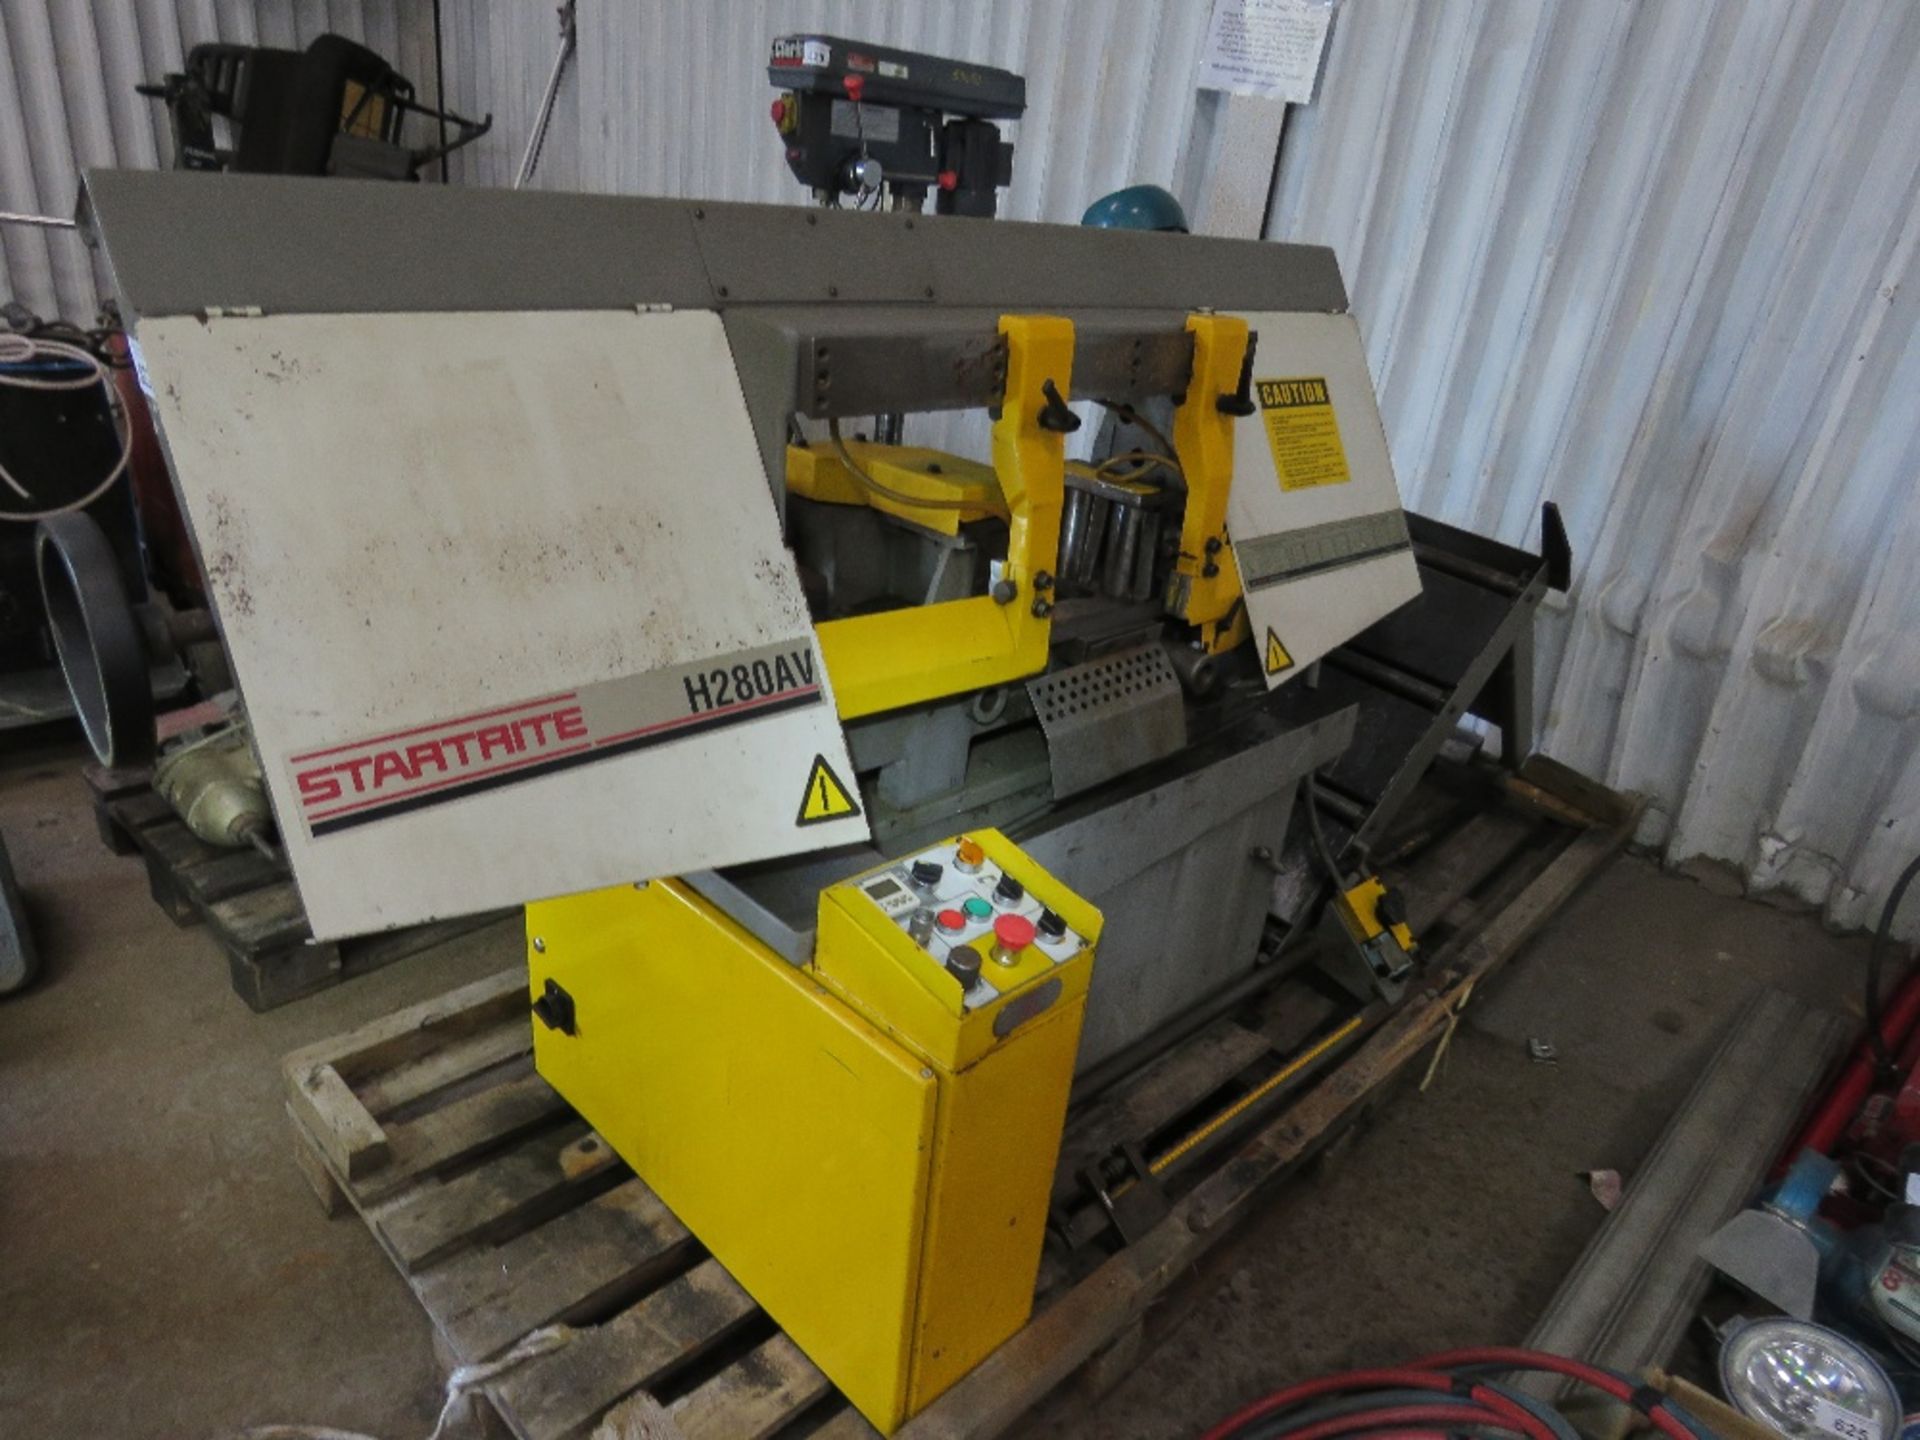 STARTRITE H280AV 3 PHASE HORIZONTAL BANDSAW. SOURCED FROM COMPANY LIQUIDATION, SEEN WORKING WHEN RE